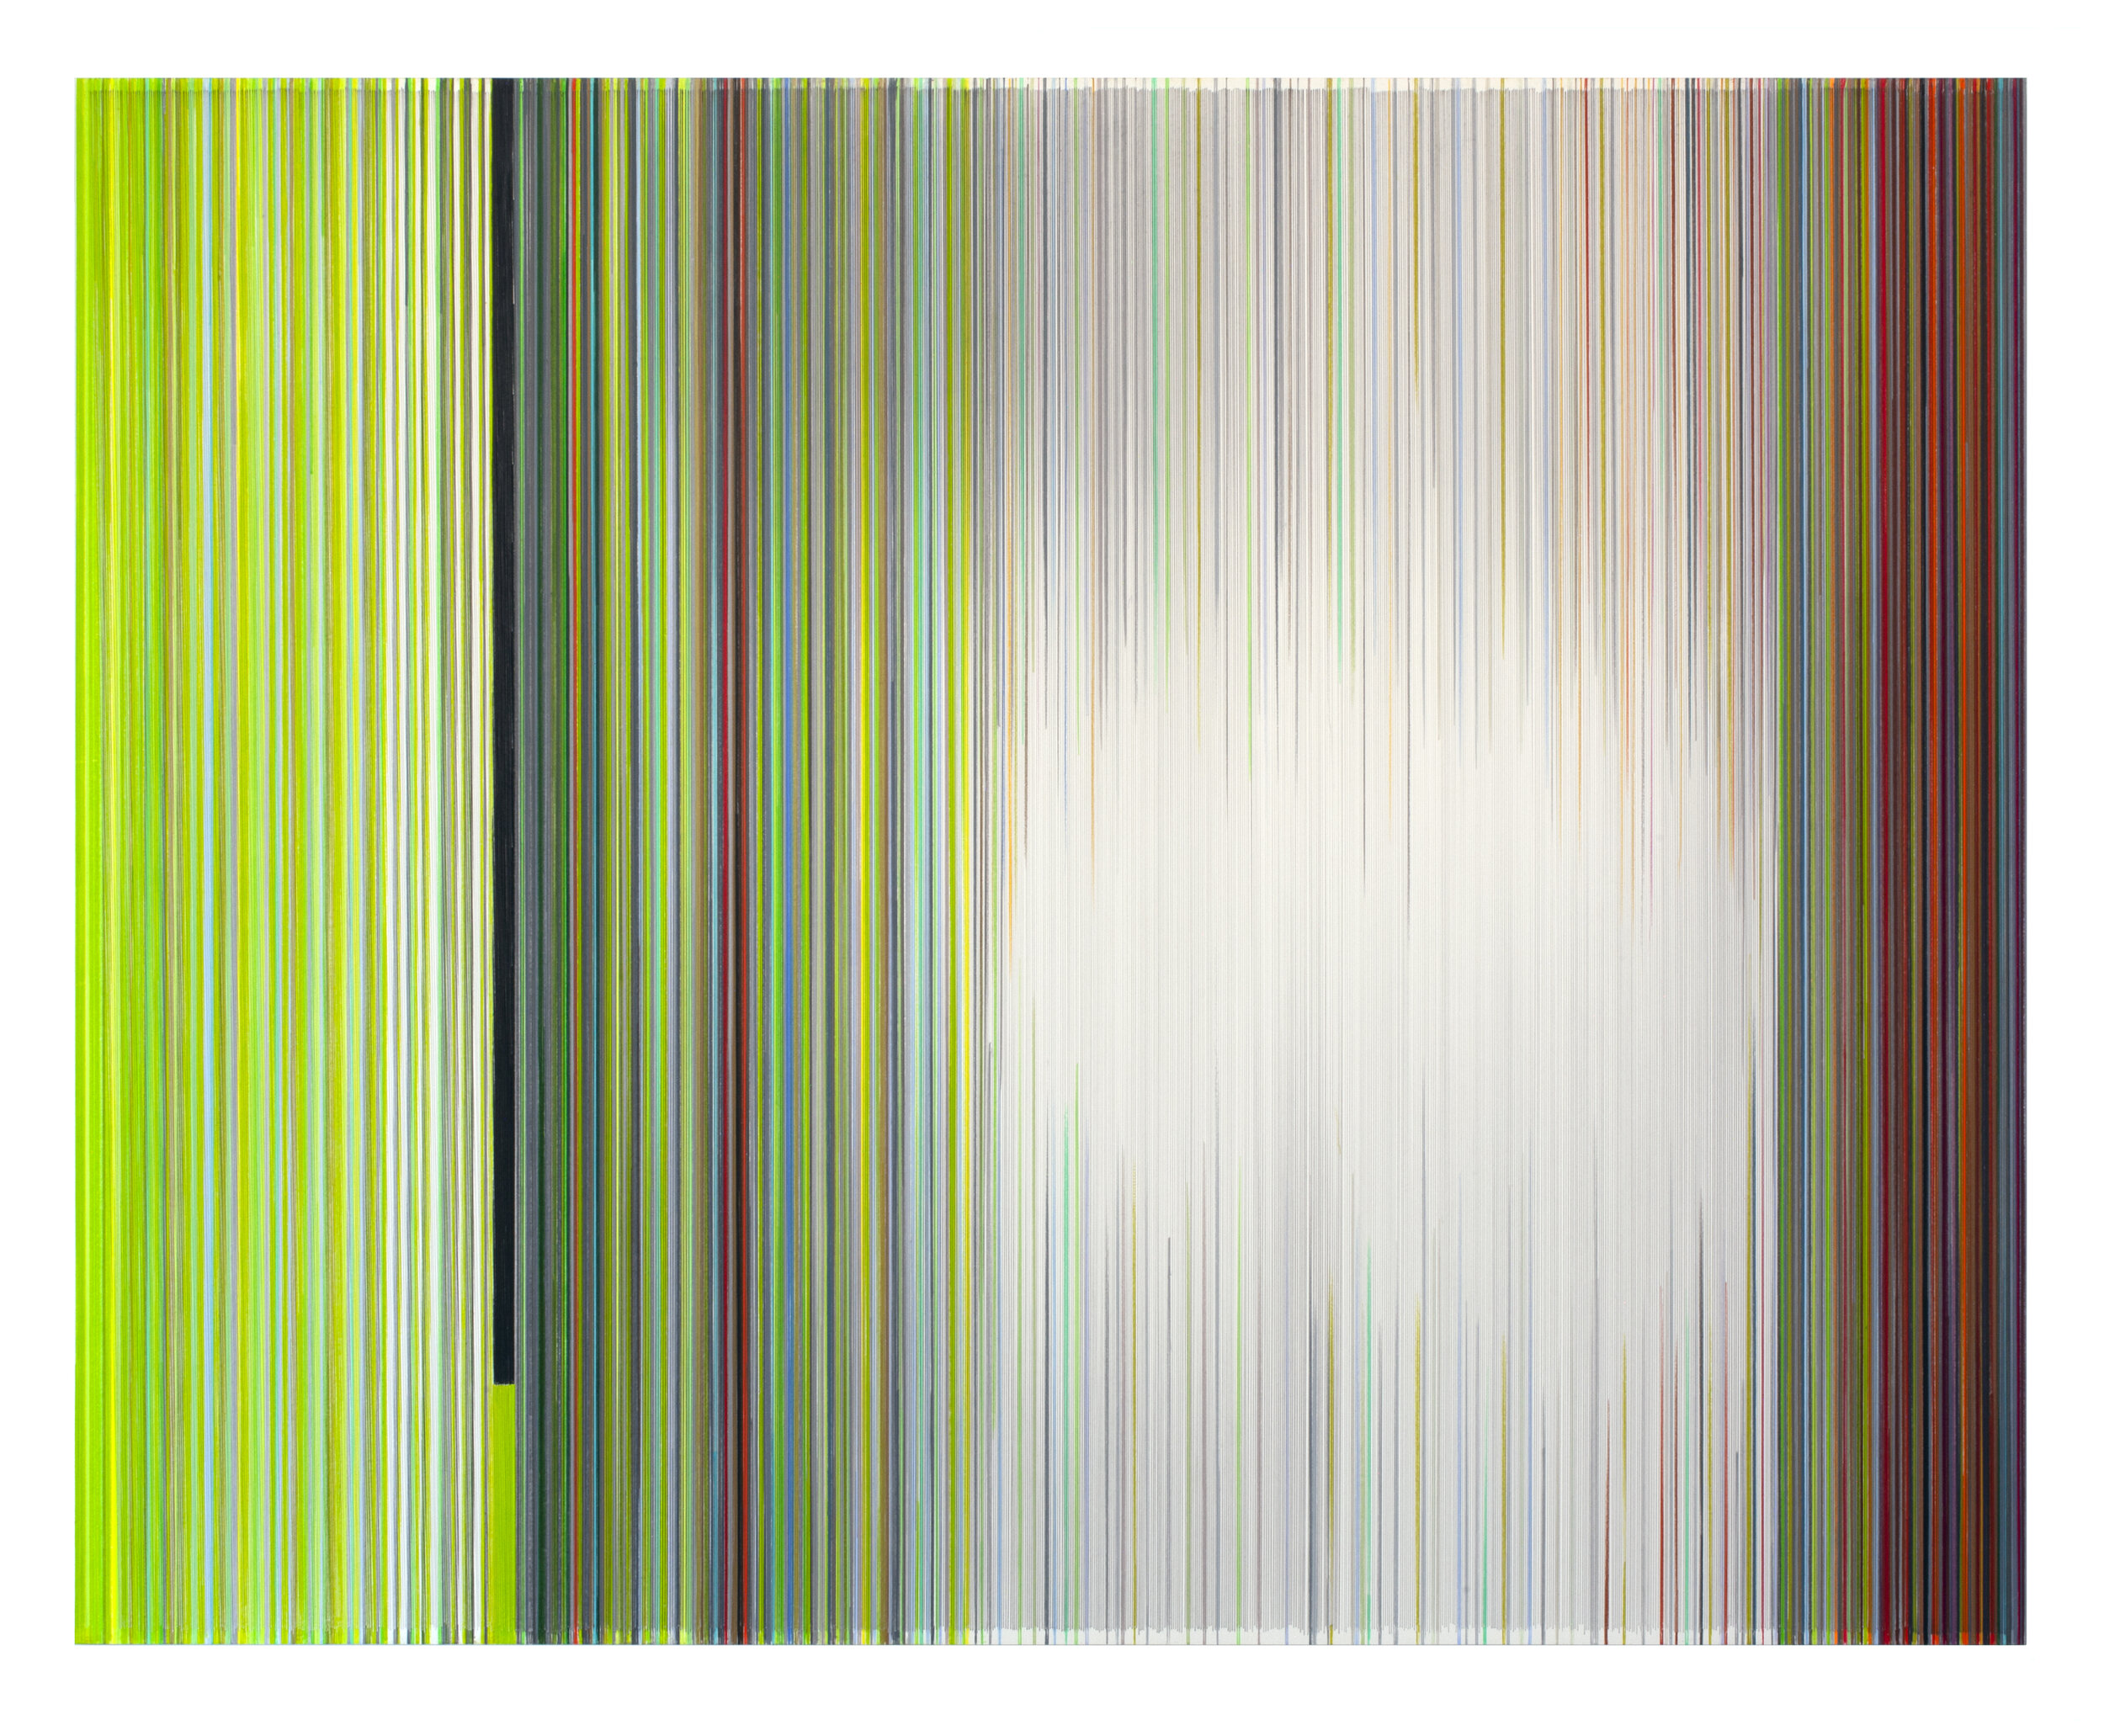    roots of how we measure 11   2021 graphite and colored pencil on mat board 40 x 50 inches exhibited in  AbStranded: Fiber and Abstraction in Contemporary Art,  curated by Elizabeth Dunbar at the Everson Museum of Art, Syracuse, NY photograph by th